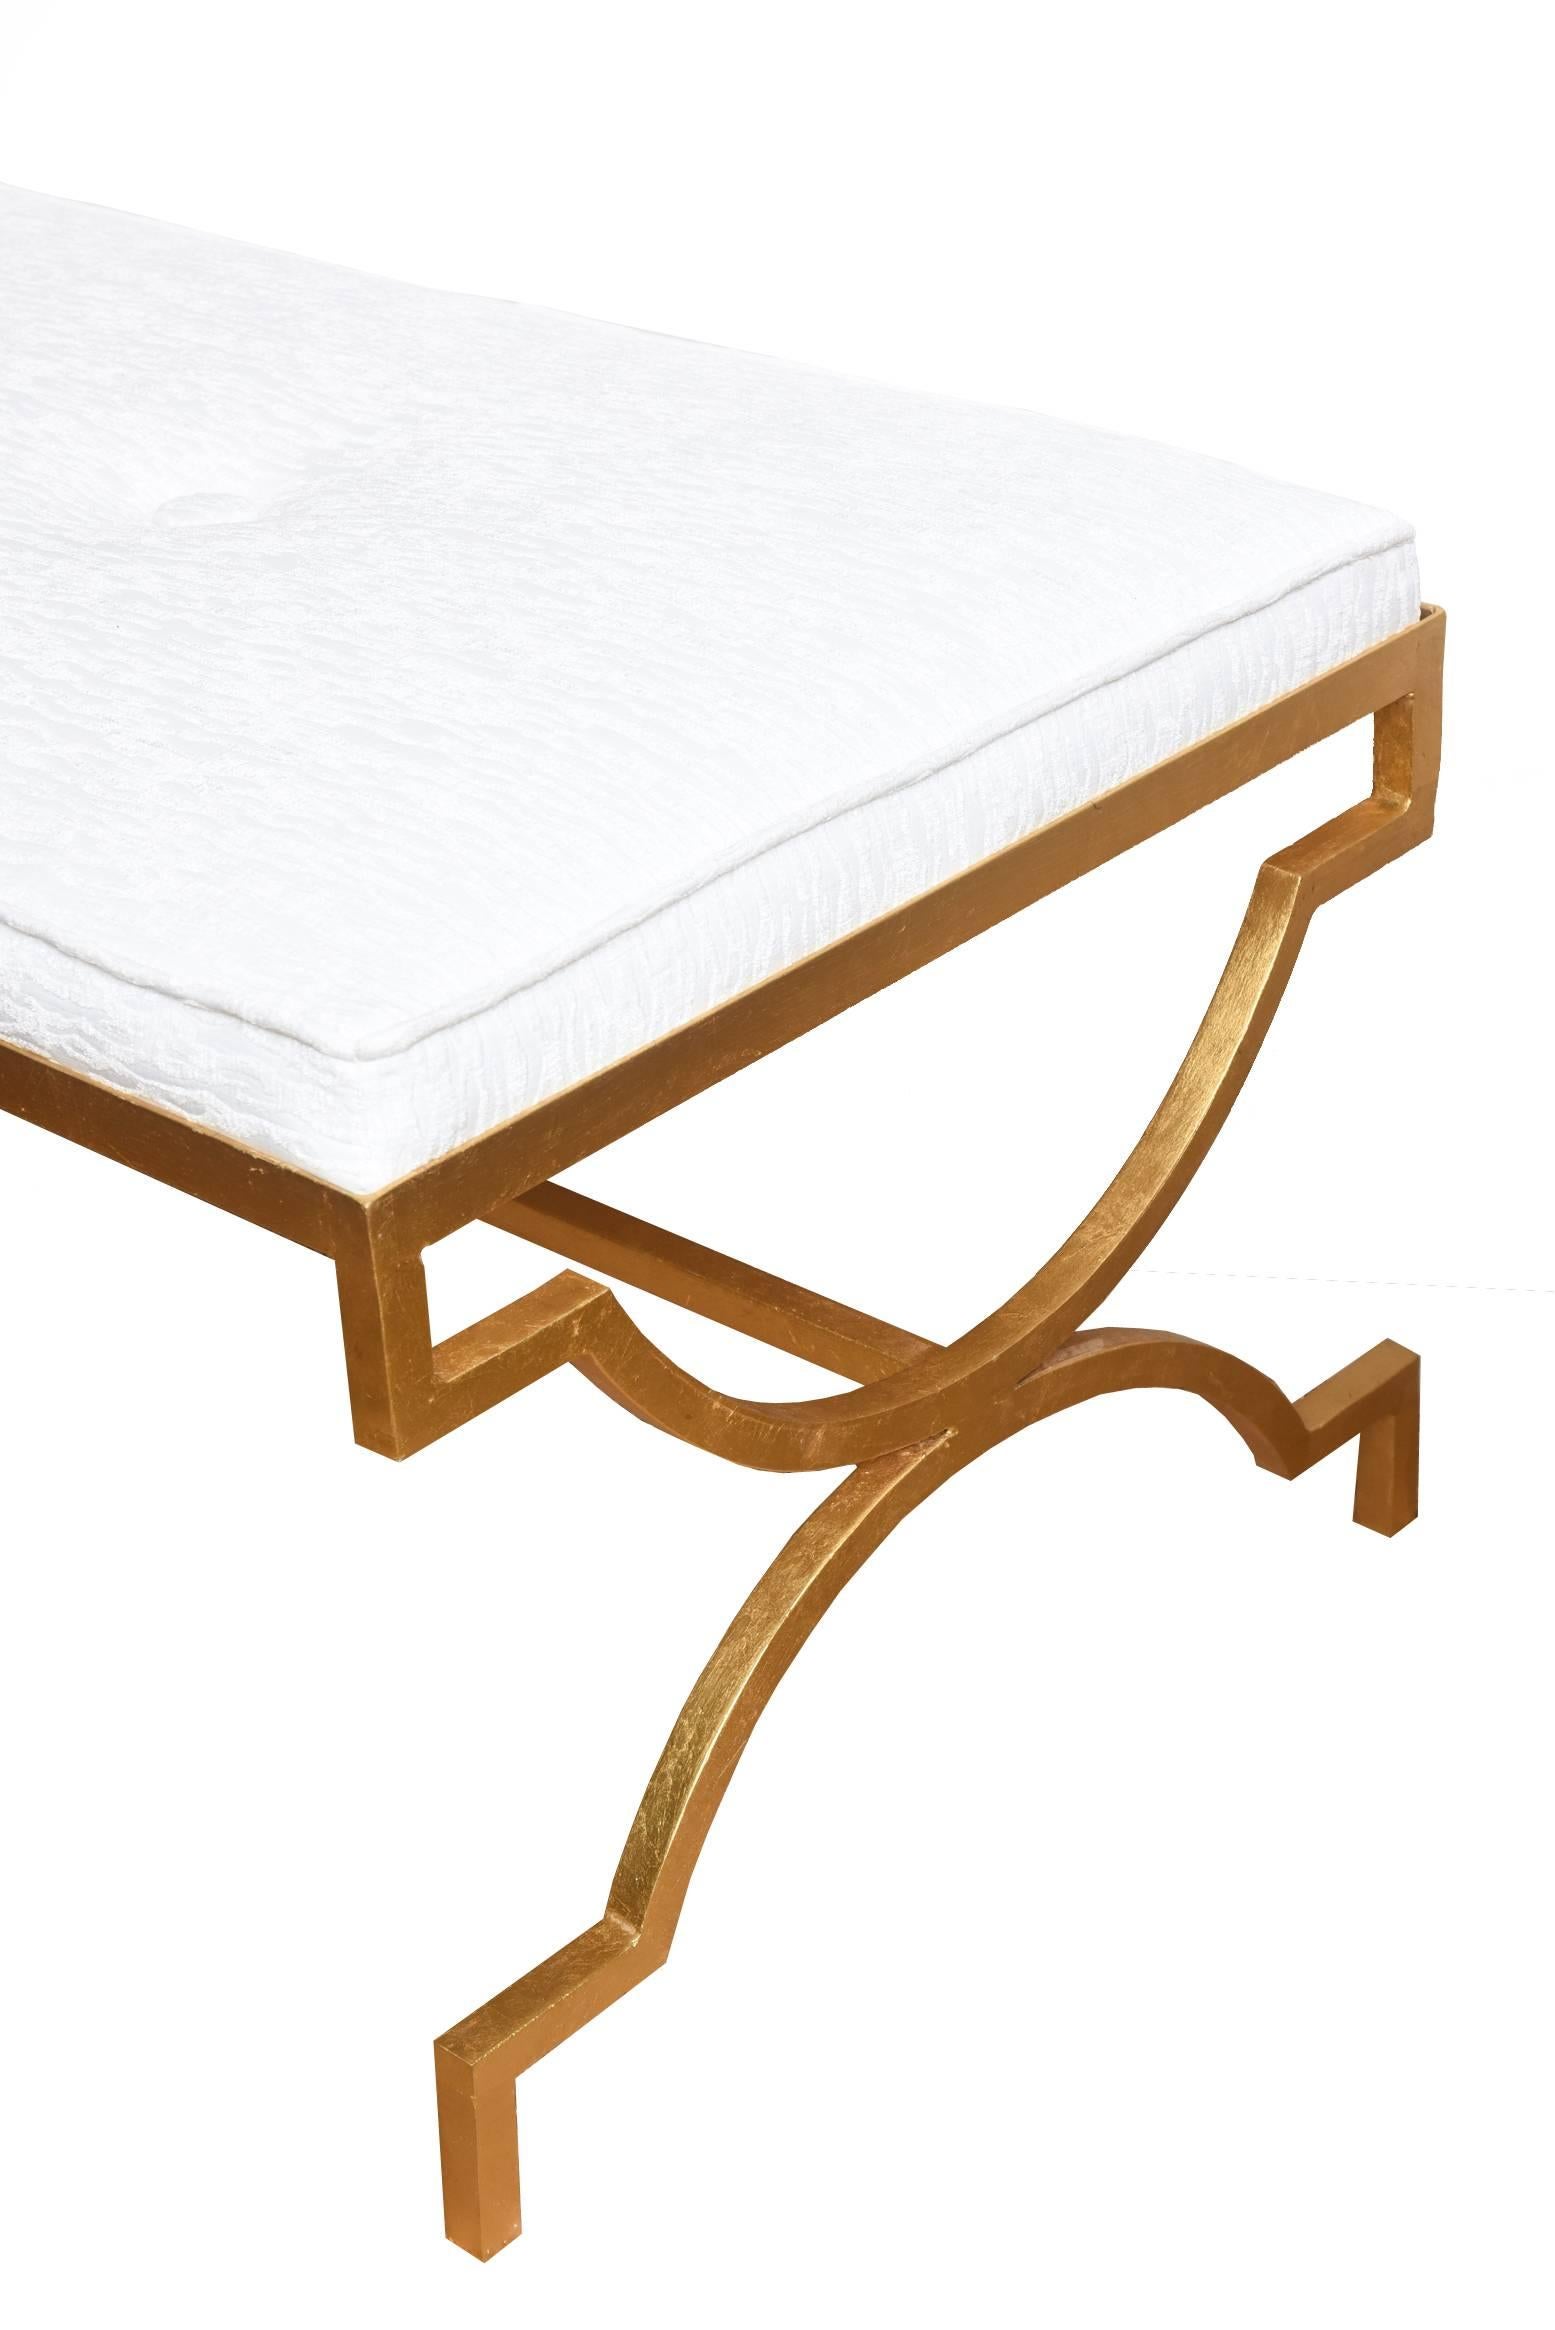 This stunning Hollywood Regency inspired Mid-Century Modern vintage Tommi Parzinger gold leafed iron bench has been totally restored. It has been newly upholstered in a white cut velvet sculptural fabric. There are three round buttons on the top.